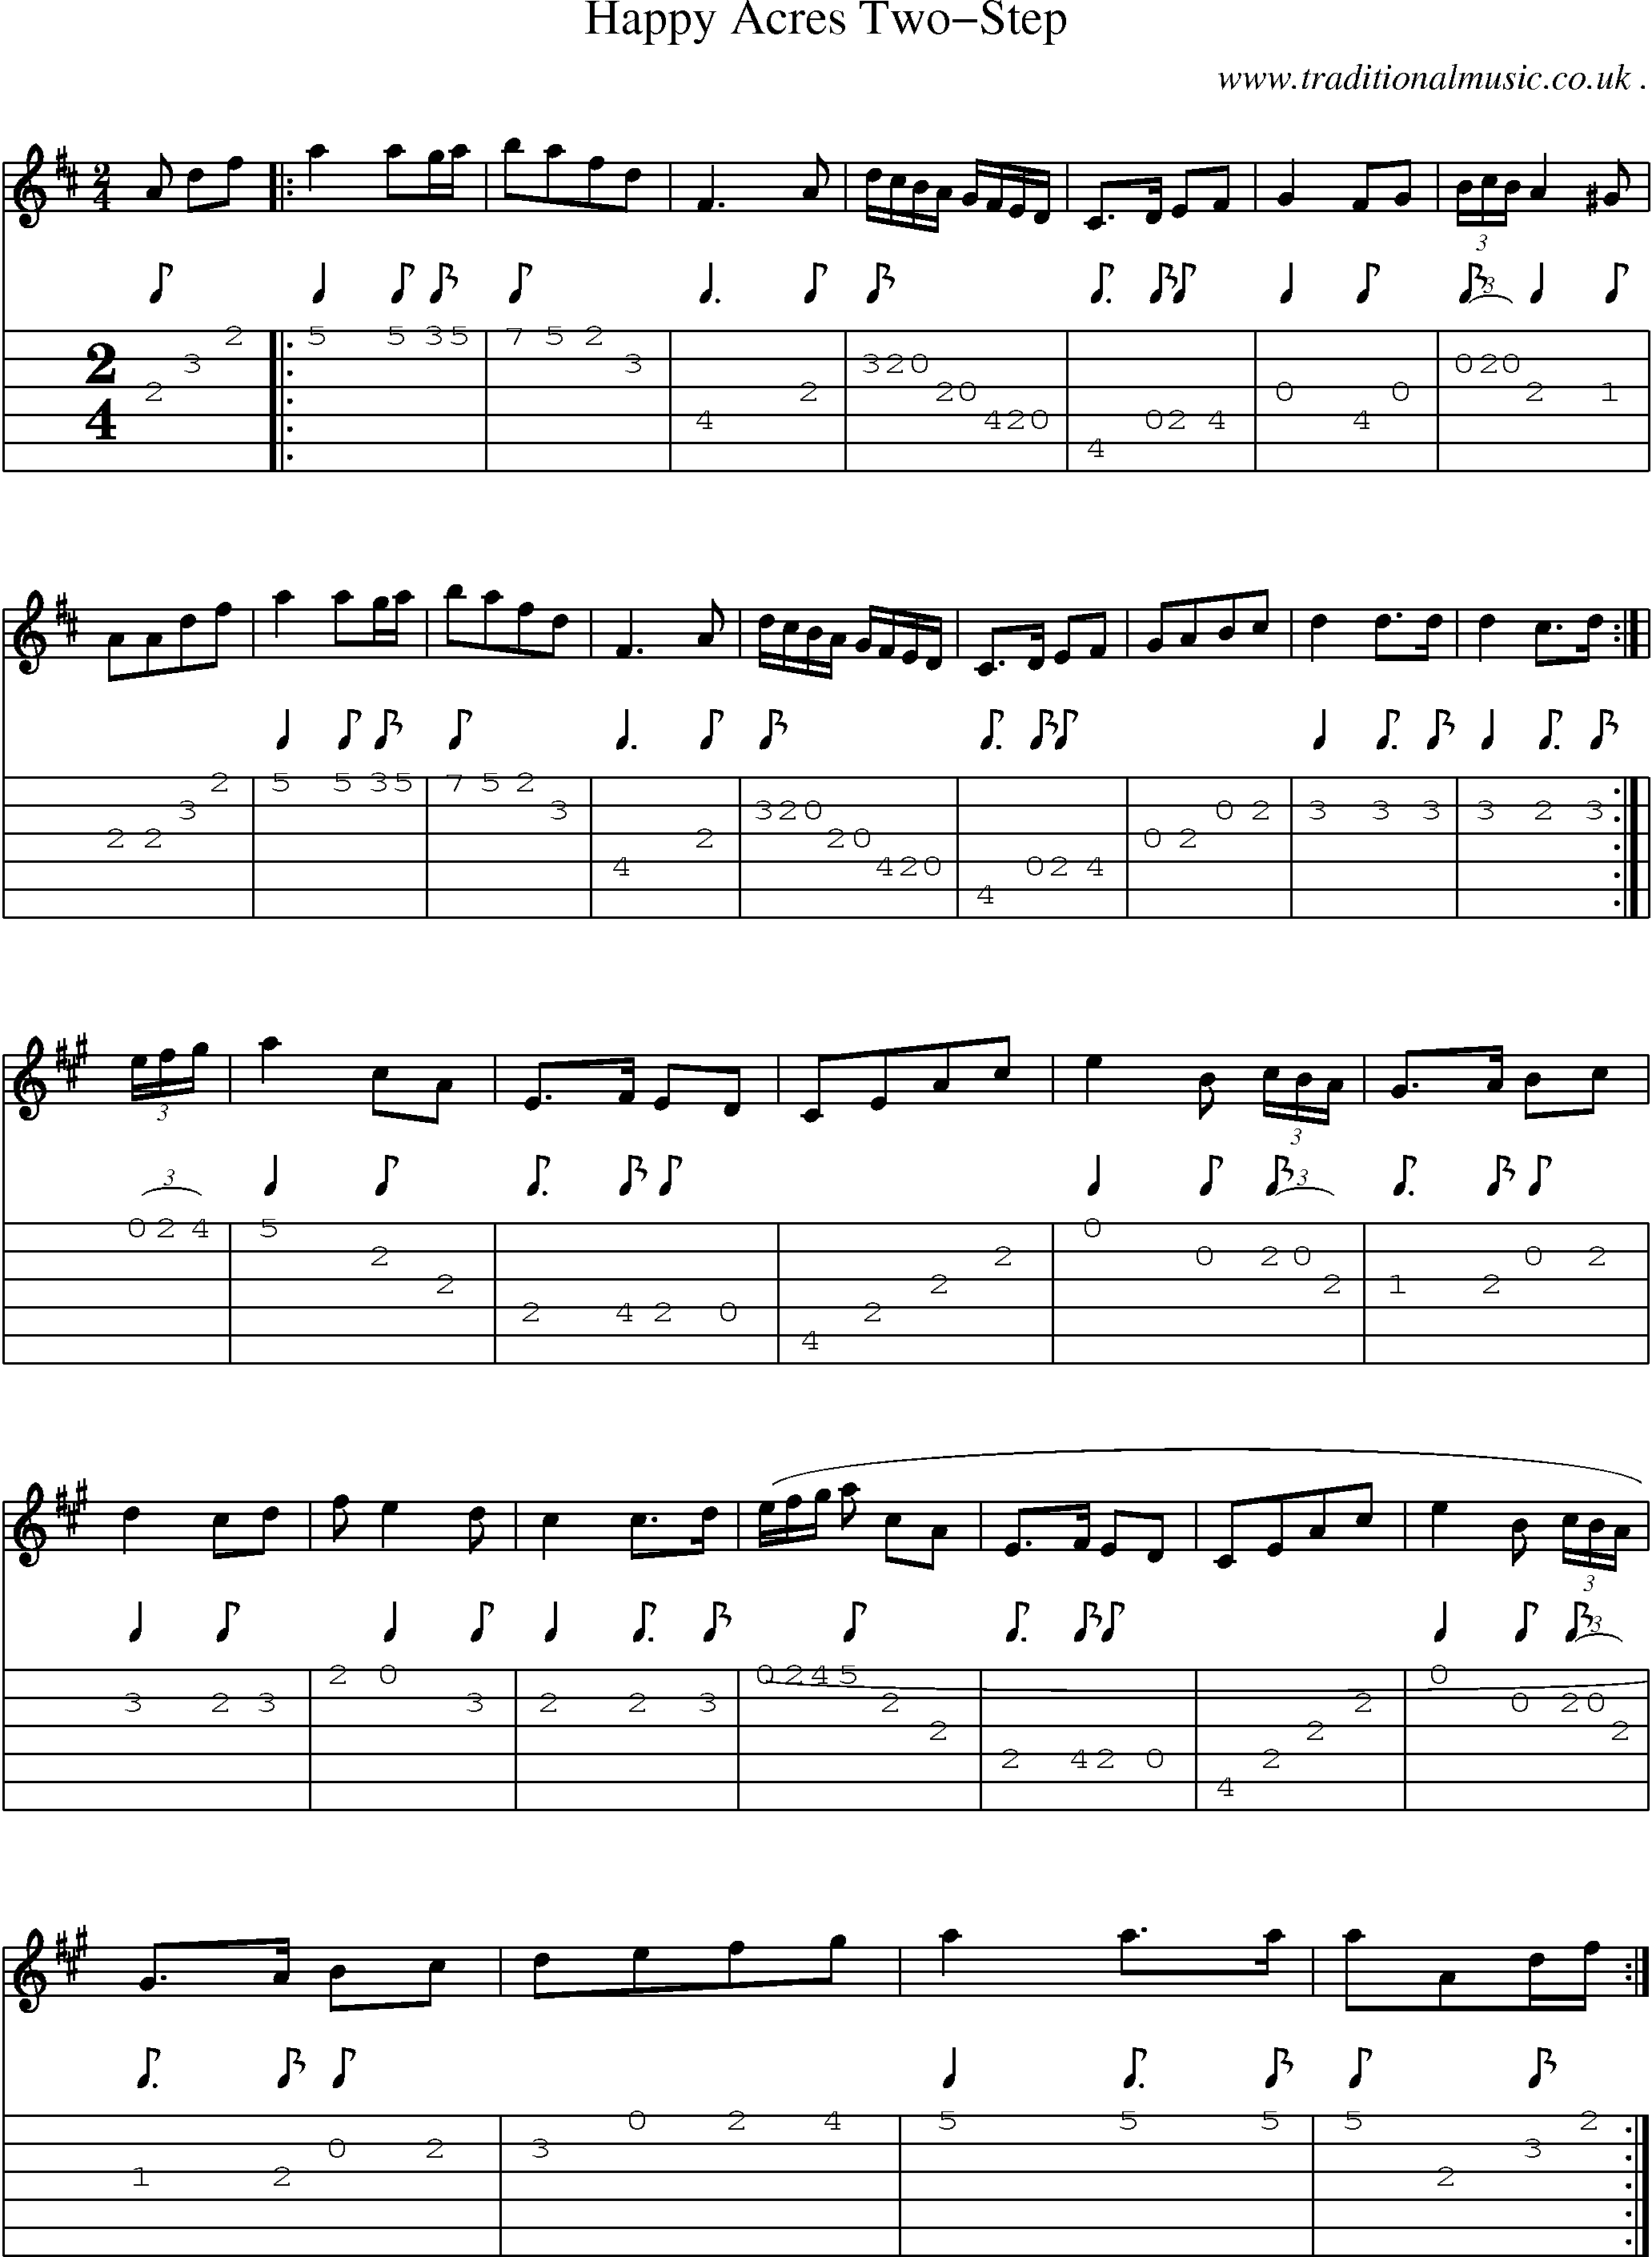 Music Score and Guitar Tabs for Happy Acres Two-step